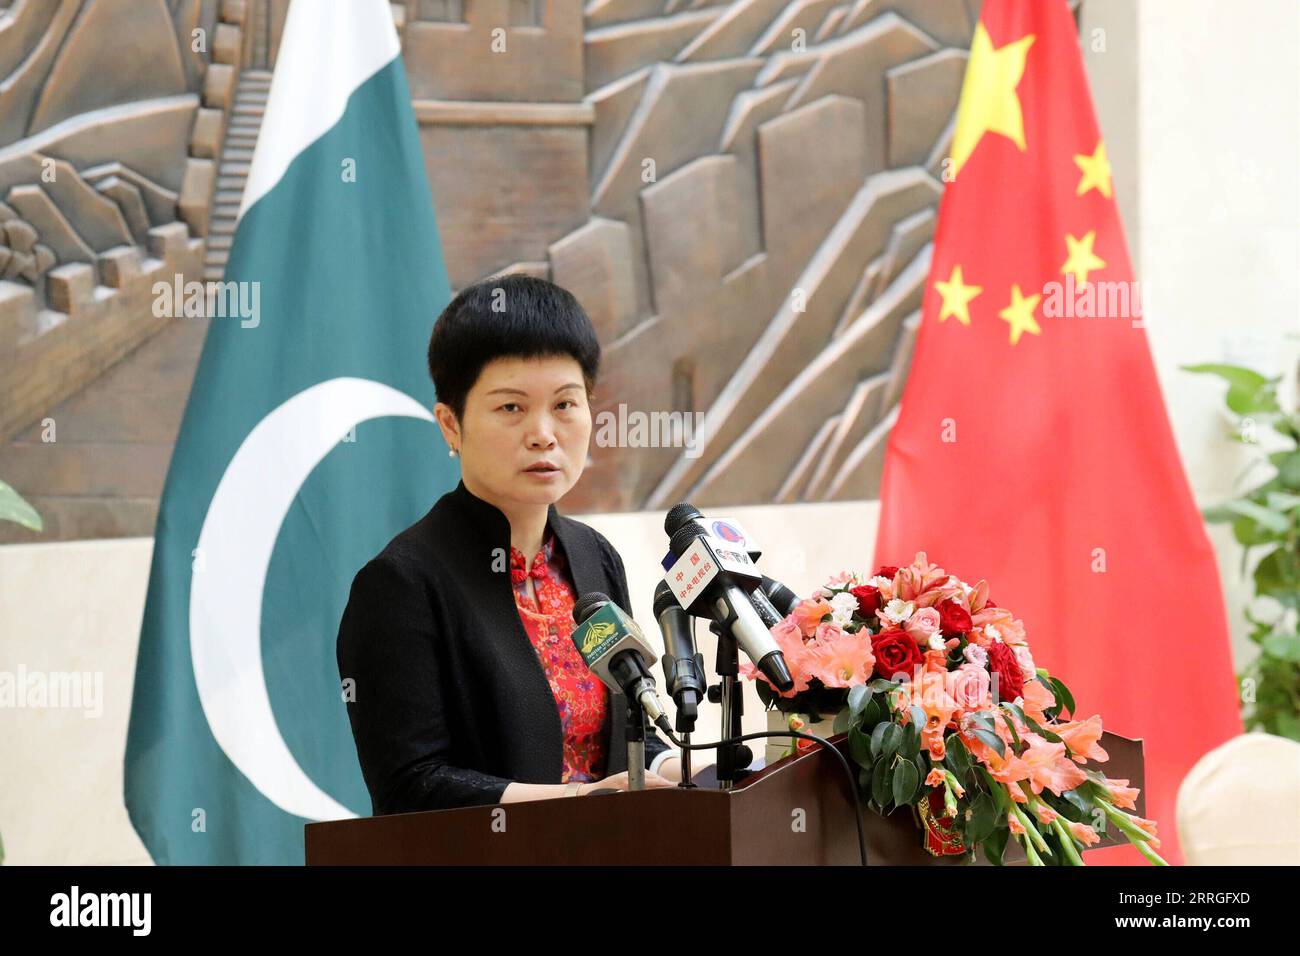 220521 -- ISLAMABAD, May 21, 2022 -- Pang Chunxue, charge d affaires of the Chinese Embassy to Pakistan, speaks on the occasion to mark the 71st anniversary of the establishment of the diplomatic relationships between China and Pakistan in Islamabad, capital of Pakistan, May 21, 2022.  PAKISTAN-ISLAMABAD-CHINA-ANNIVERSARY-DIPLOMATIC TIES JiangxChao PUBLICATIONxNOTxINxCHN Stock Photo